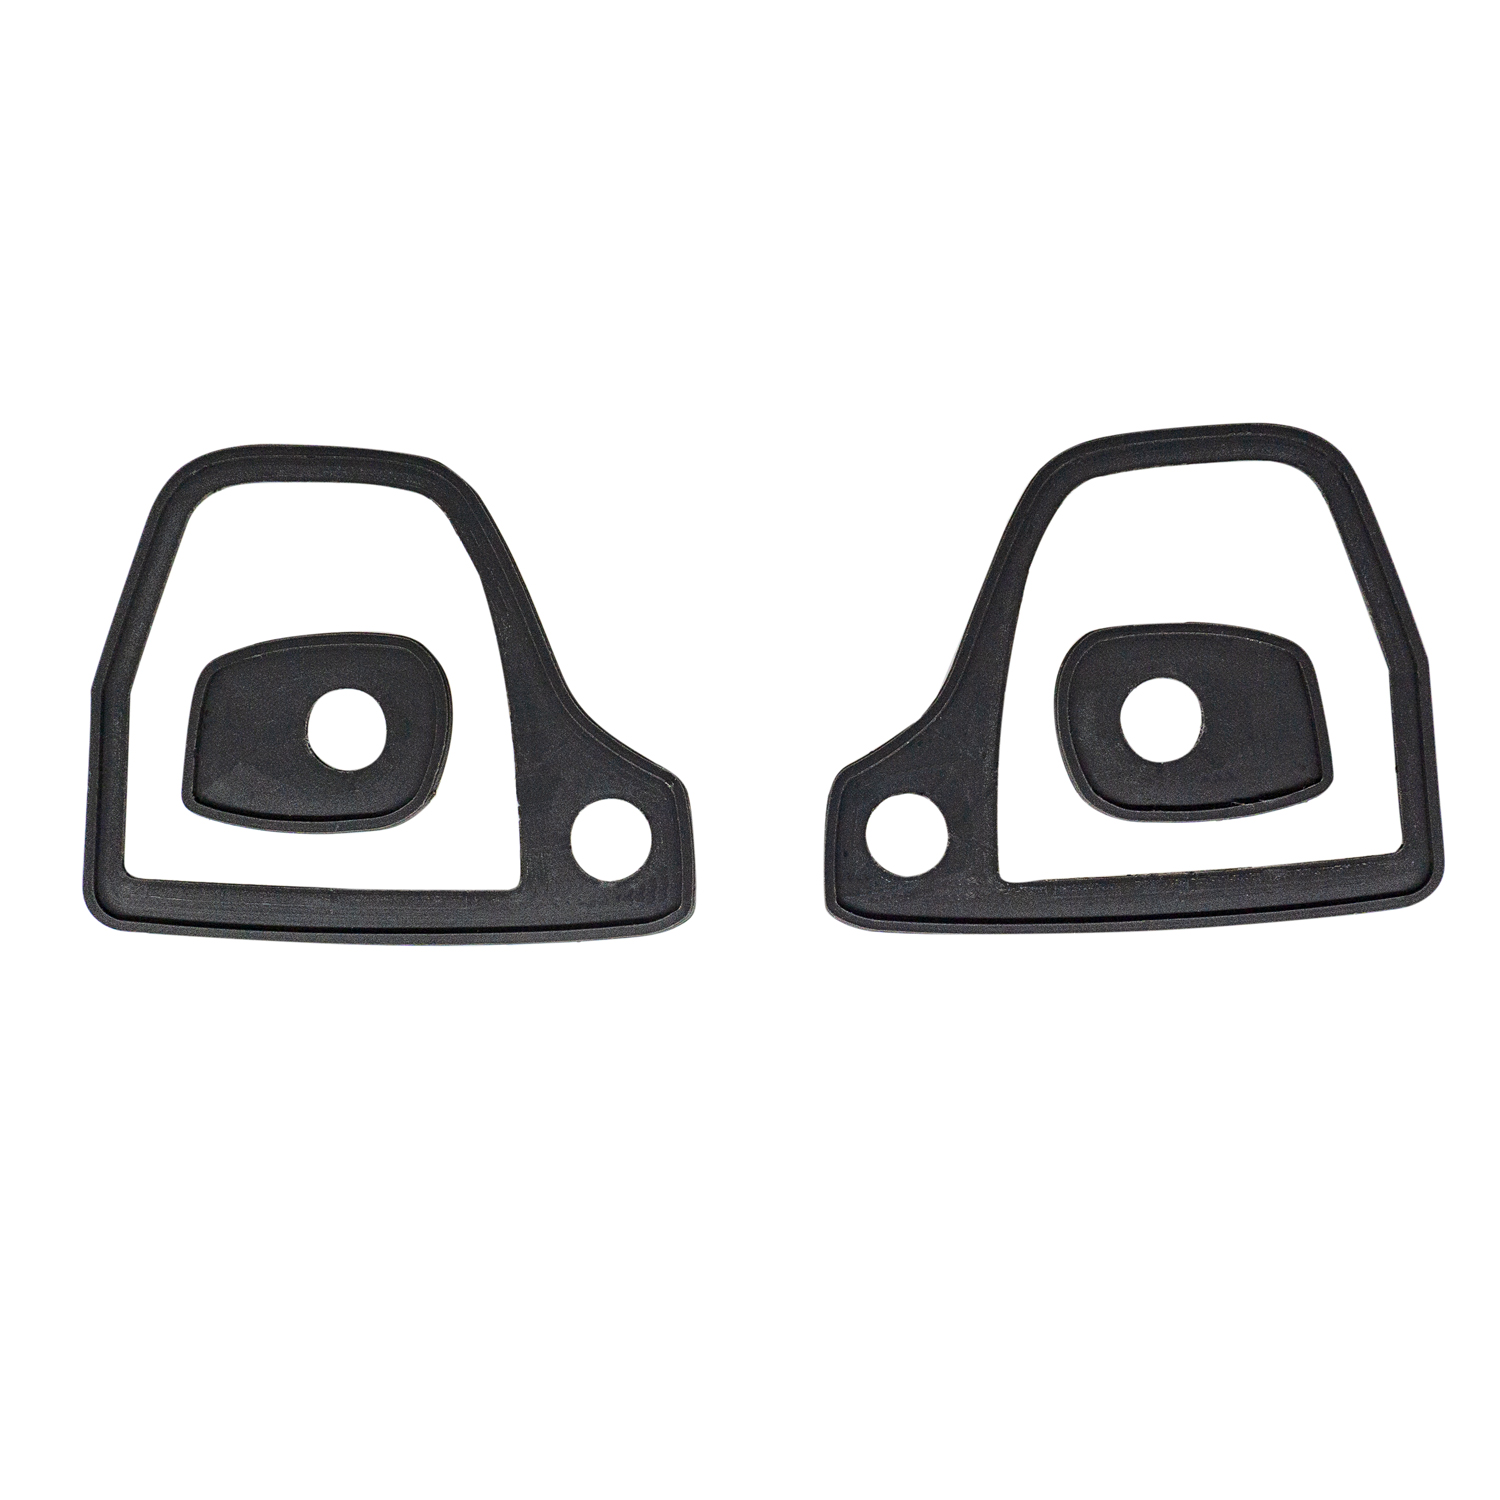 1973 GMC Jimmy Door Handle Gasket Set Fits 73-87 Chevy and GMC Trucks OEM-Style Molded Lip-MP 806